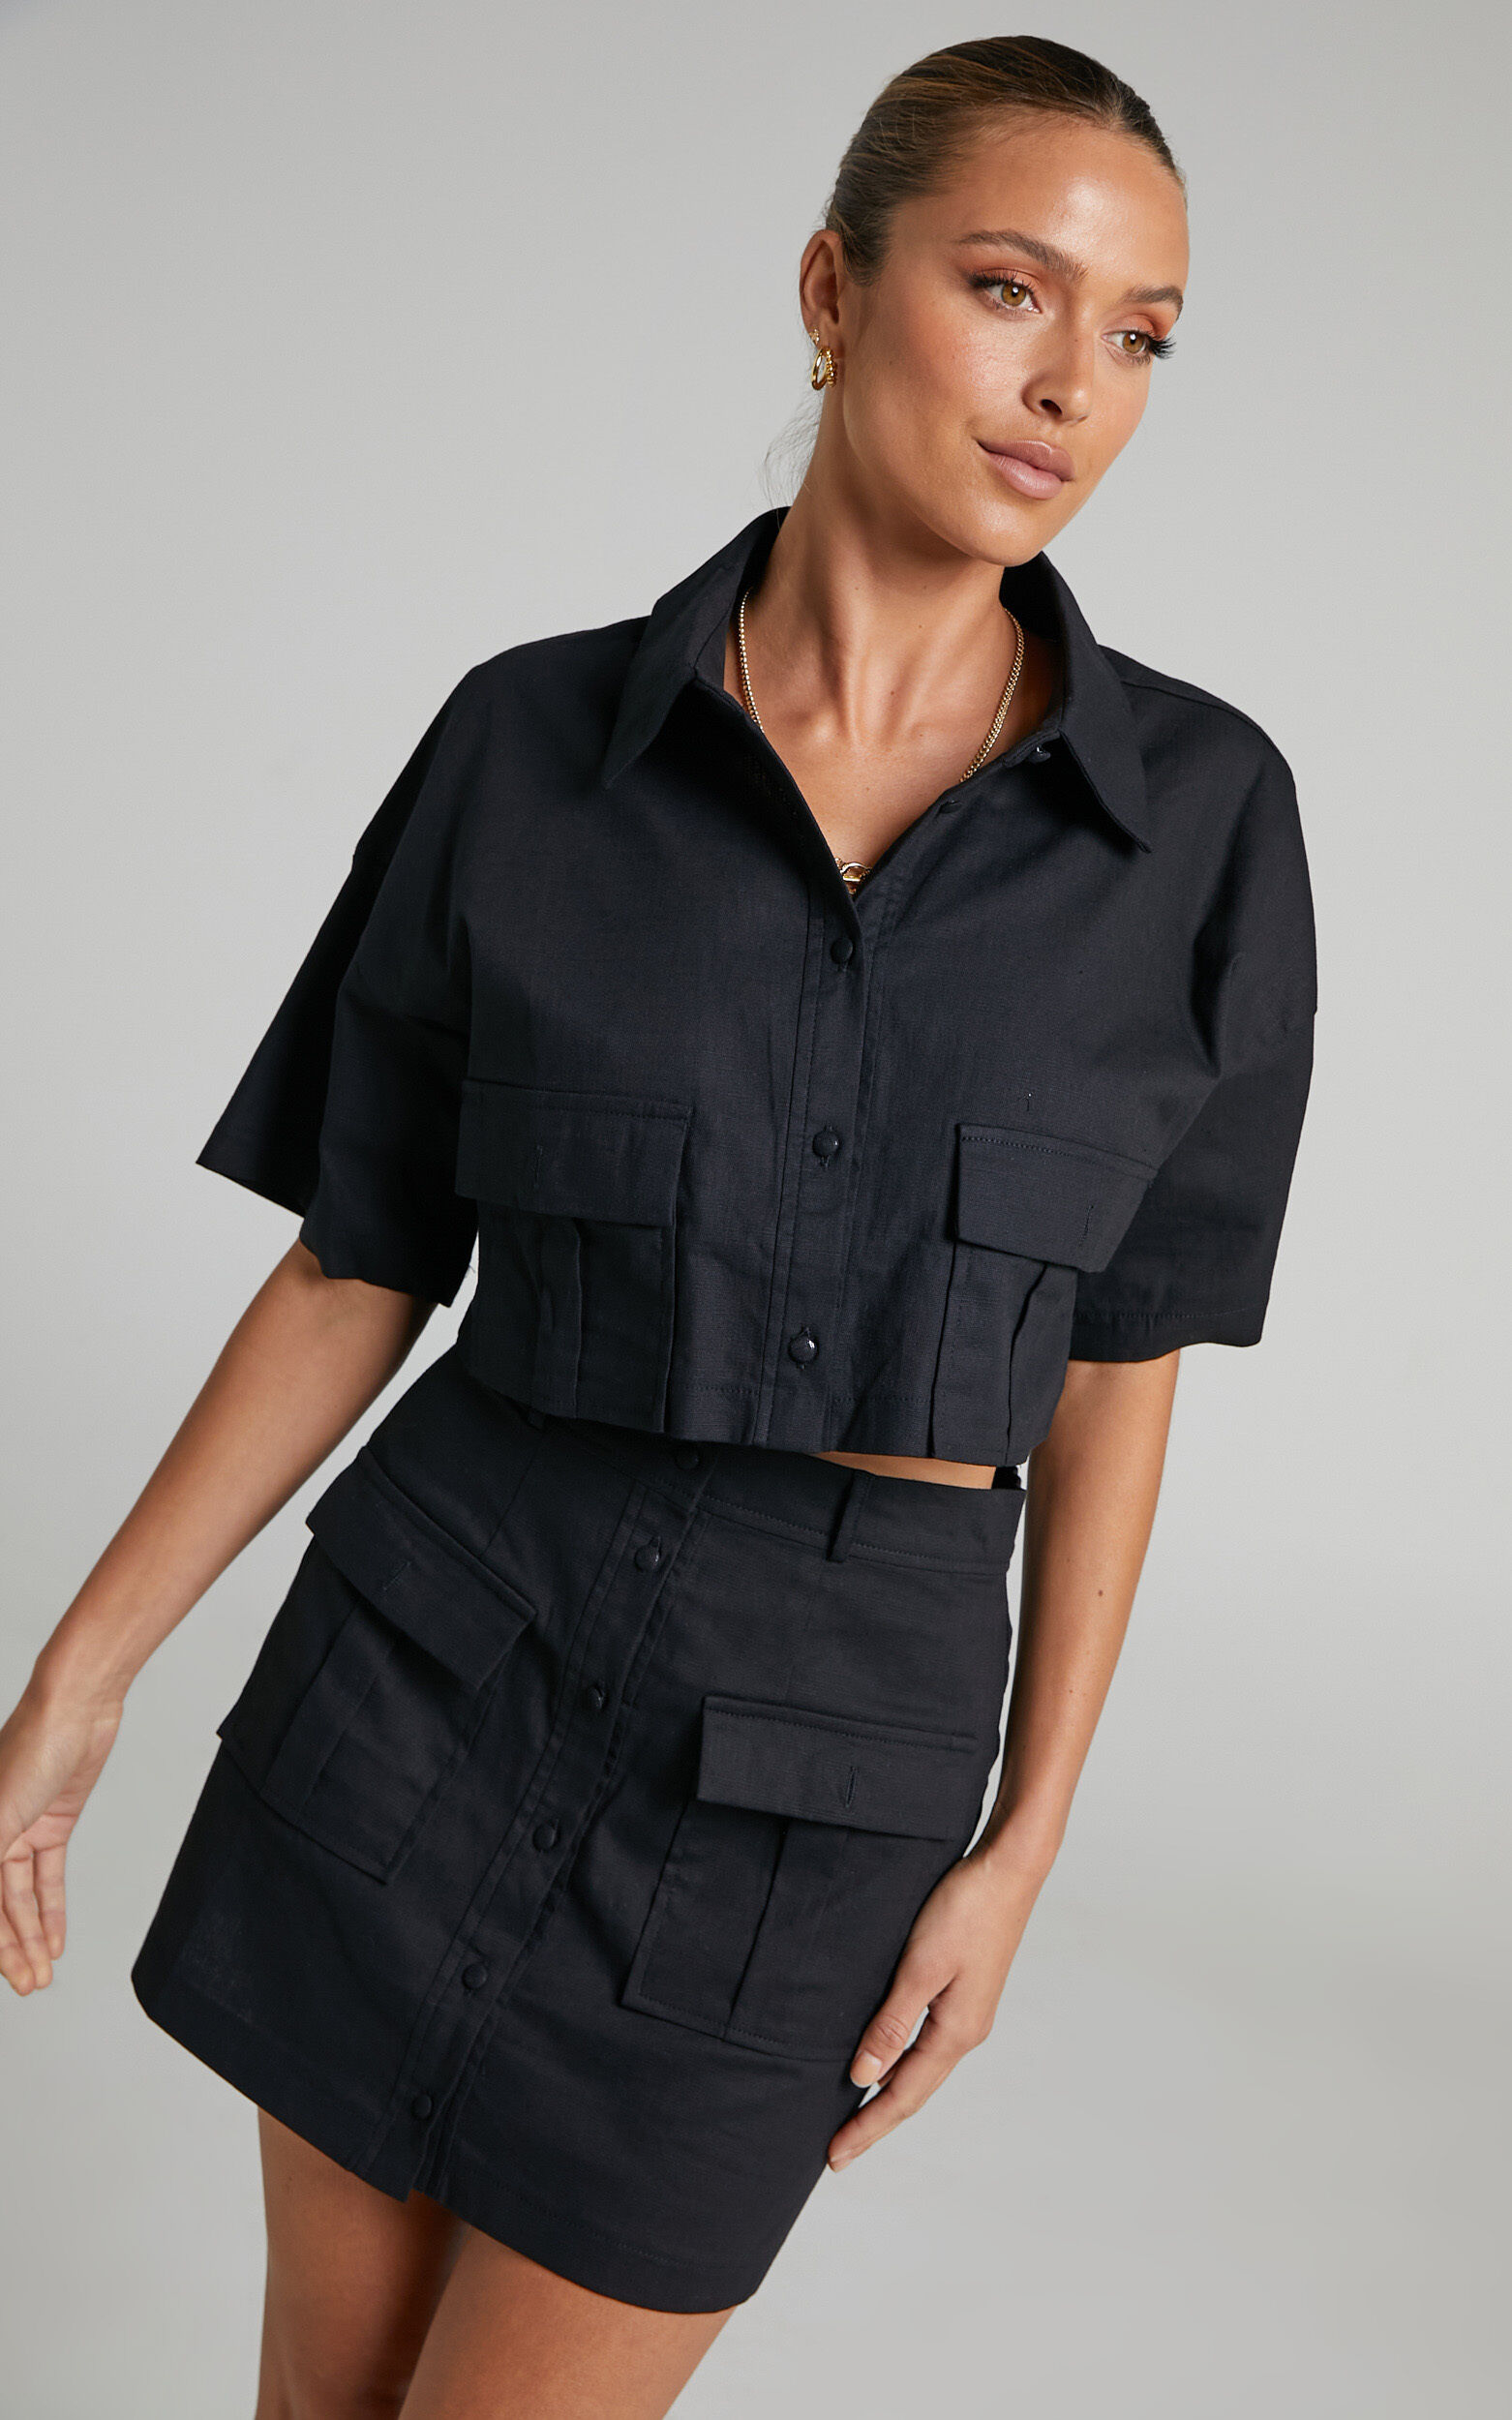 Navine Button Front Crop Top and Cargo Pocket Mini Skirt Two Piece Set in Black - 04, BLK1, super-hi-res image number null